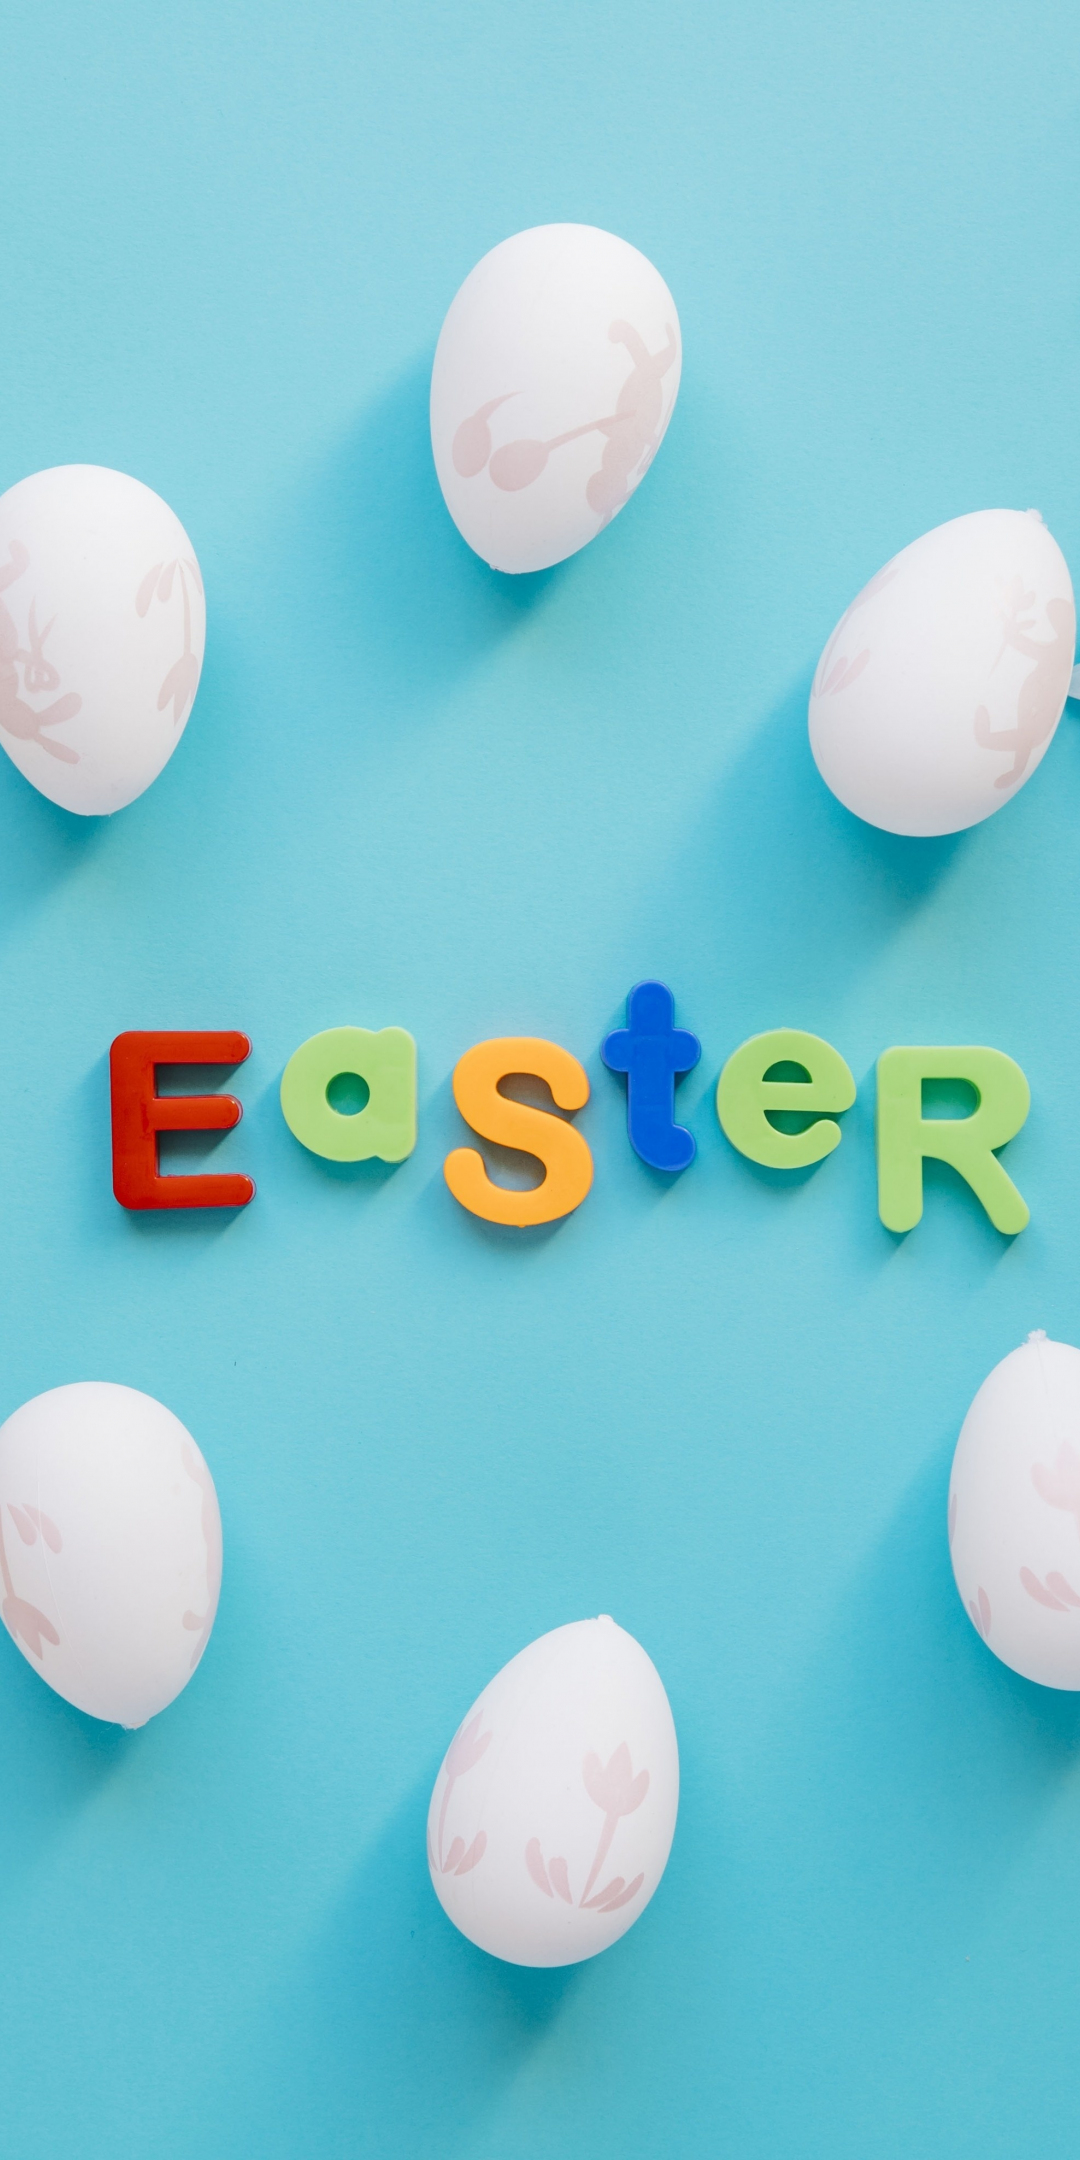 Flowers, eggs, colorful, easter, 1080x2160 wallpaper